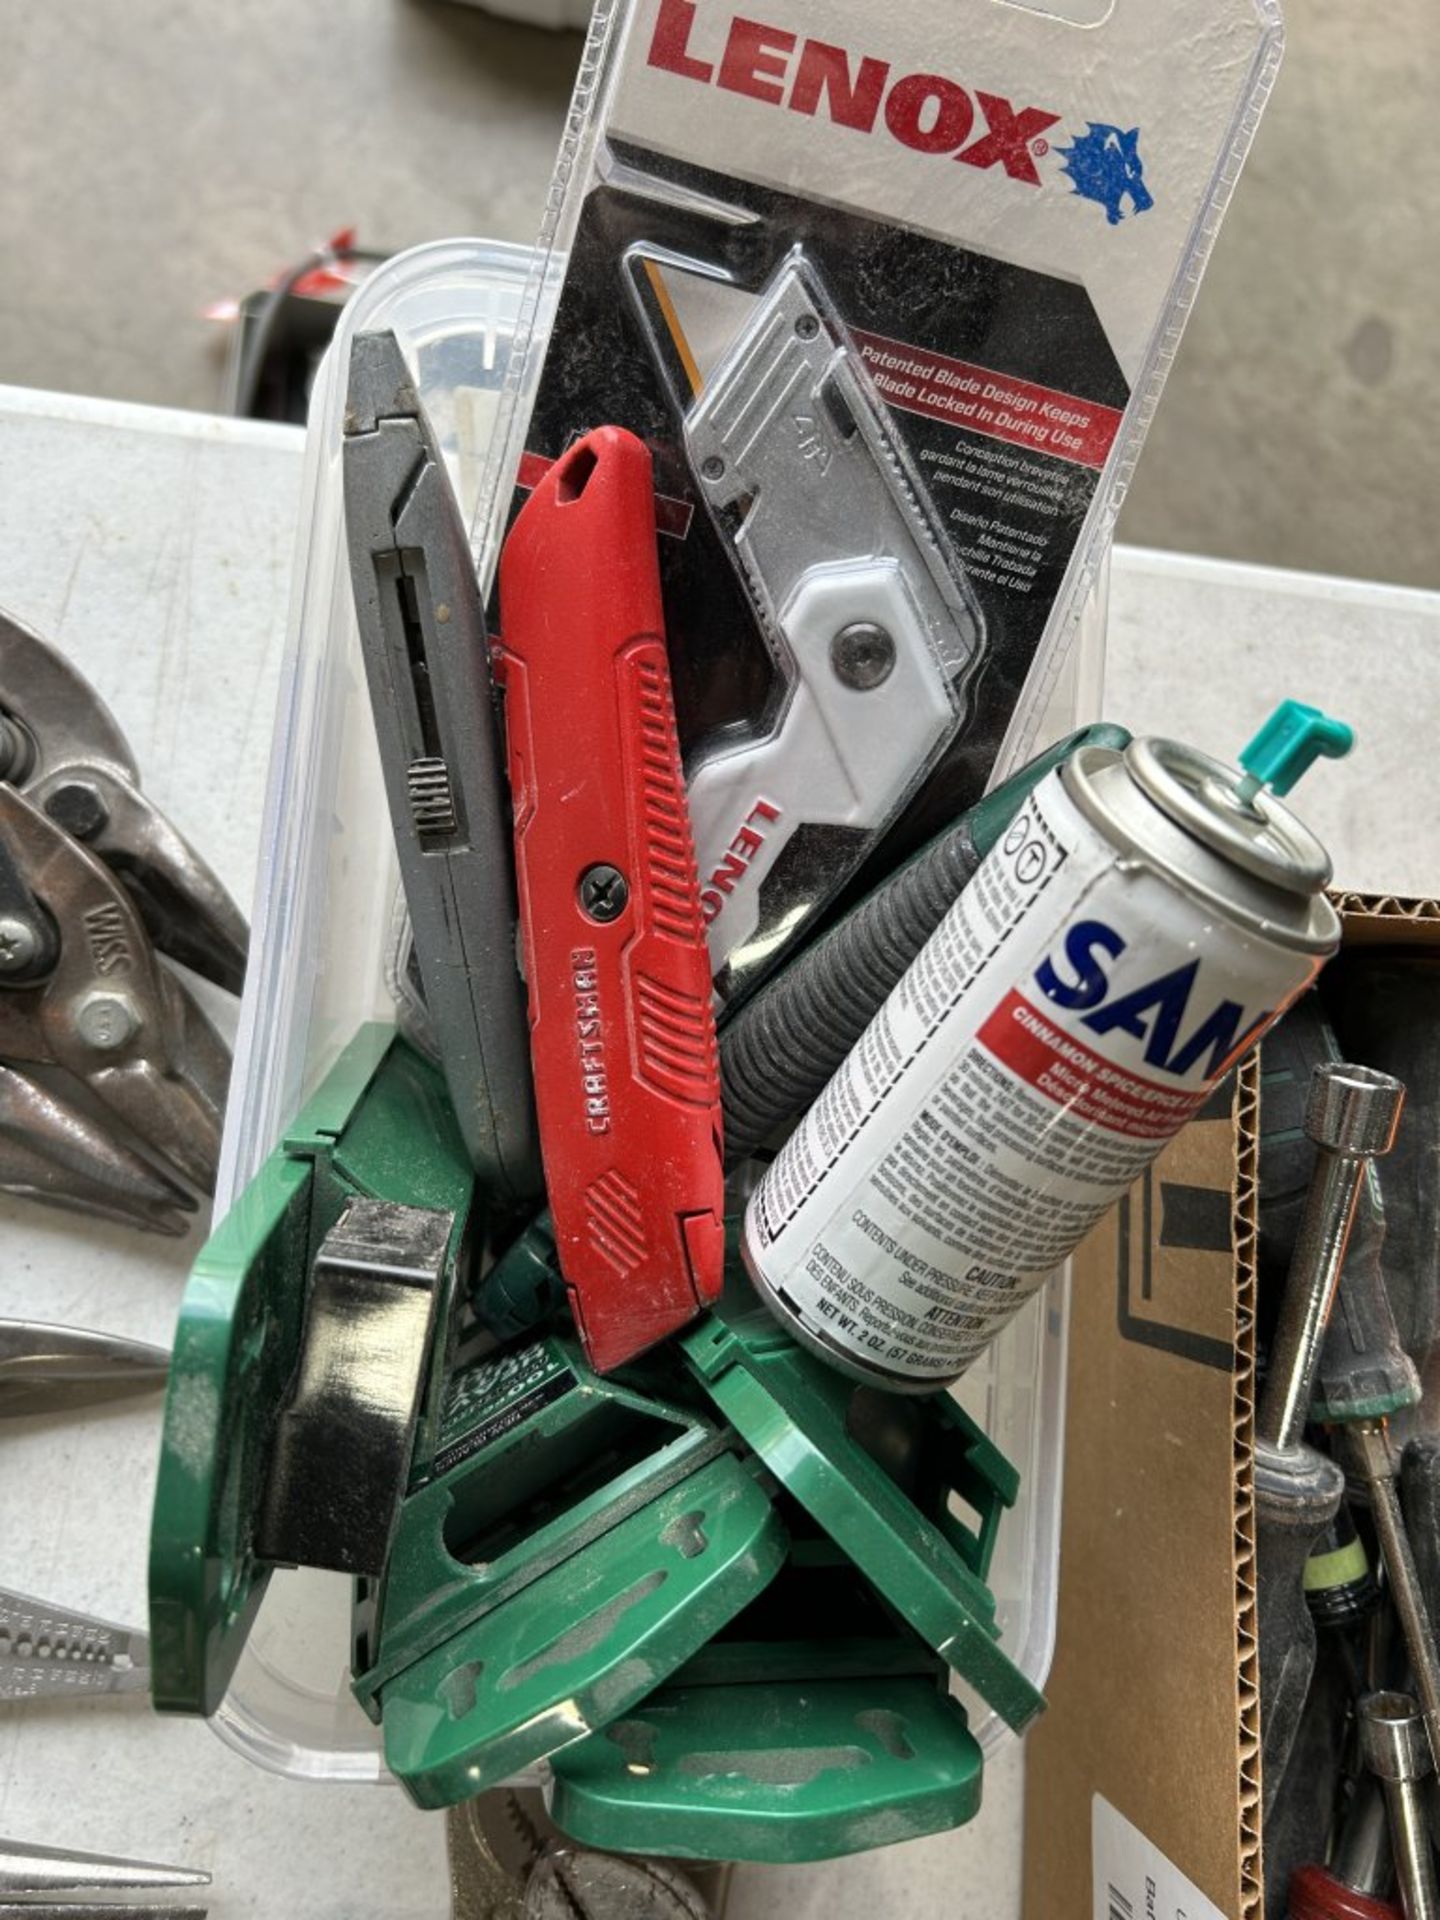 ASSORTED TOOLS INCLUDING PLIERS, TIN SNIPS, SCREWDRIVERS, RAZOR-BLADES, ETC. - Image 7 of 7